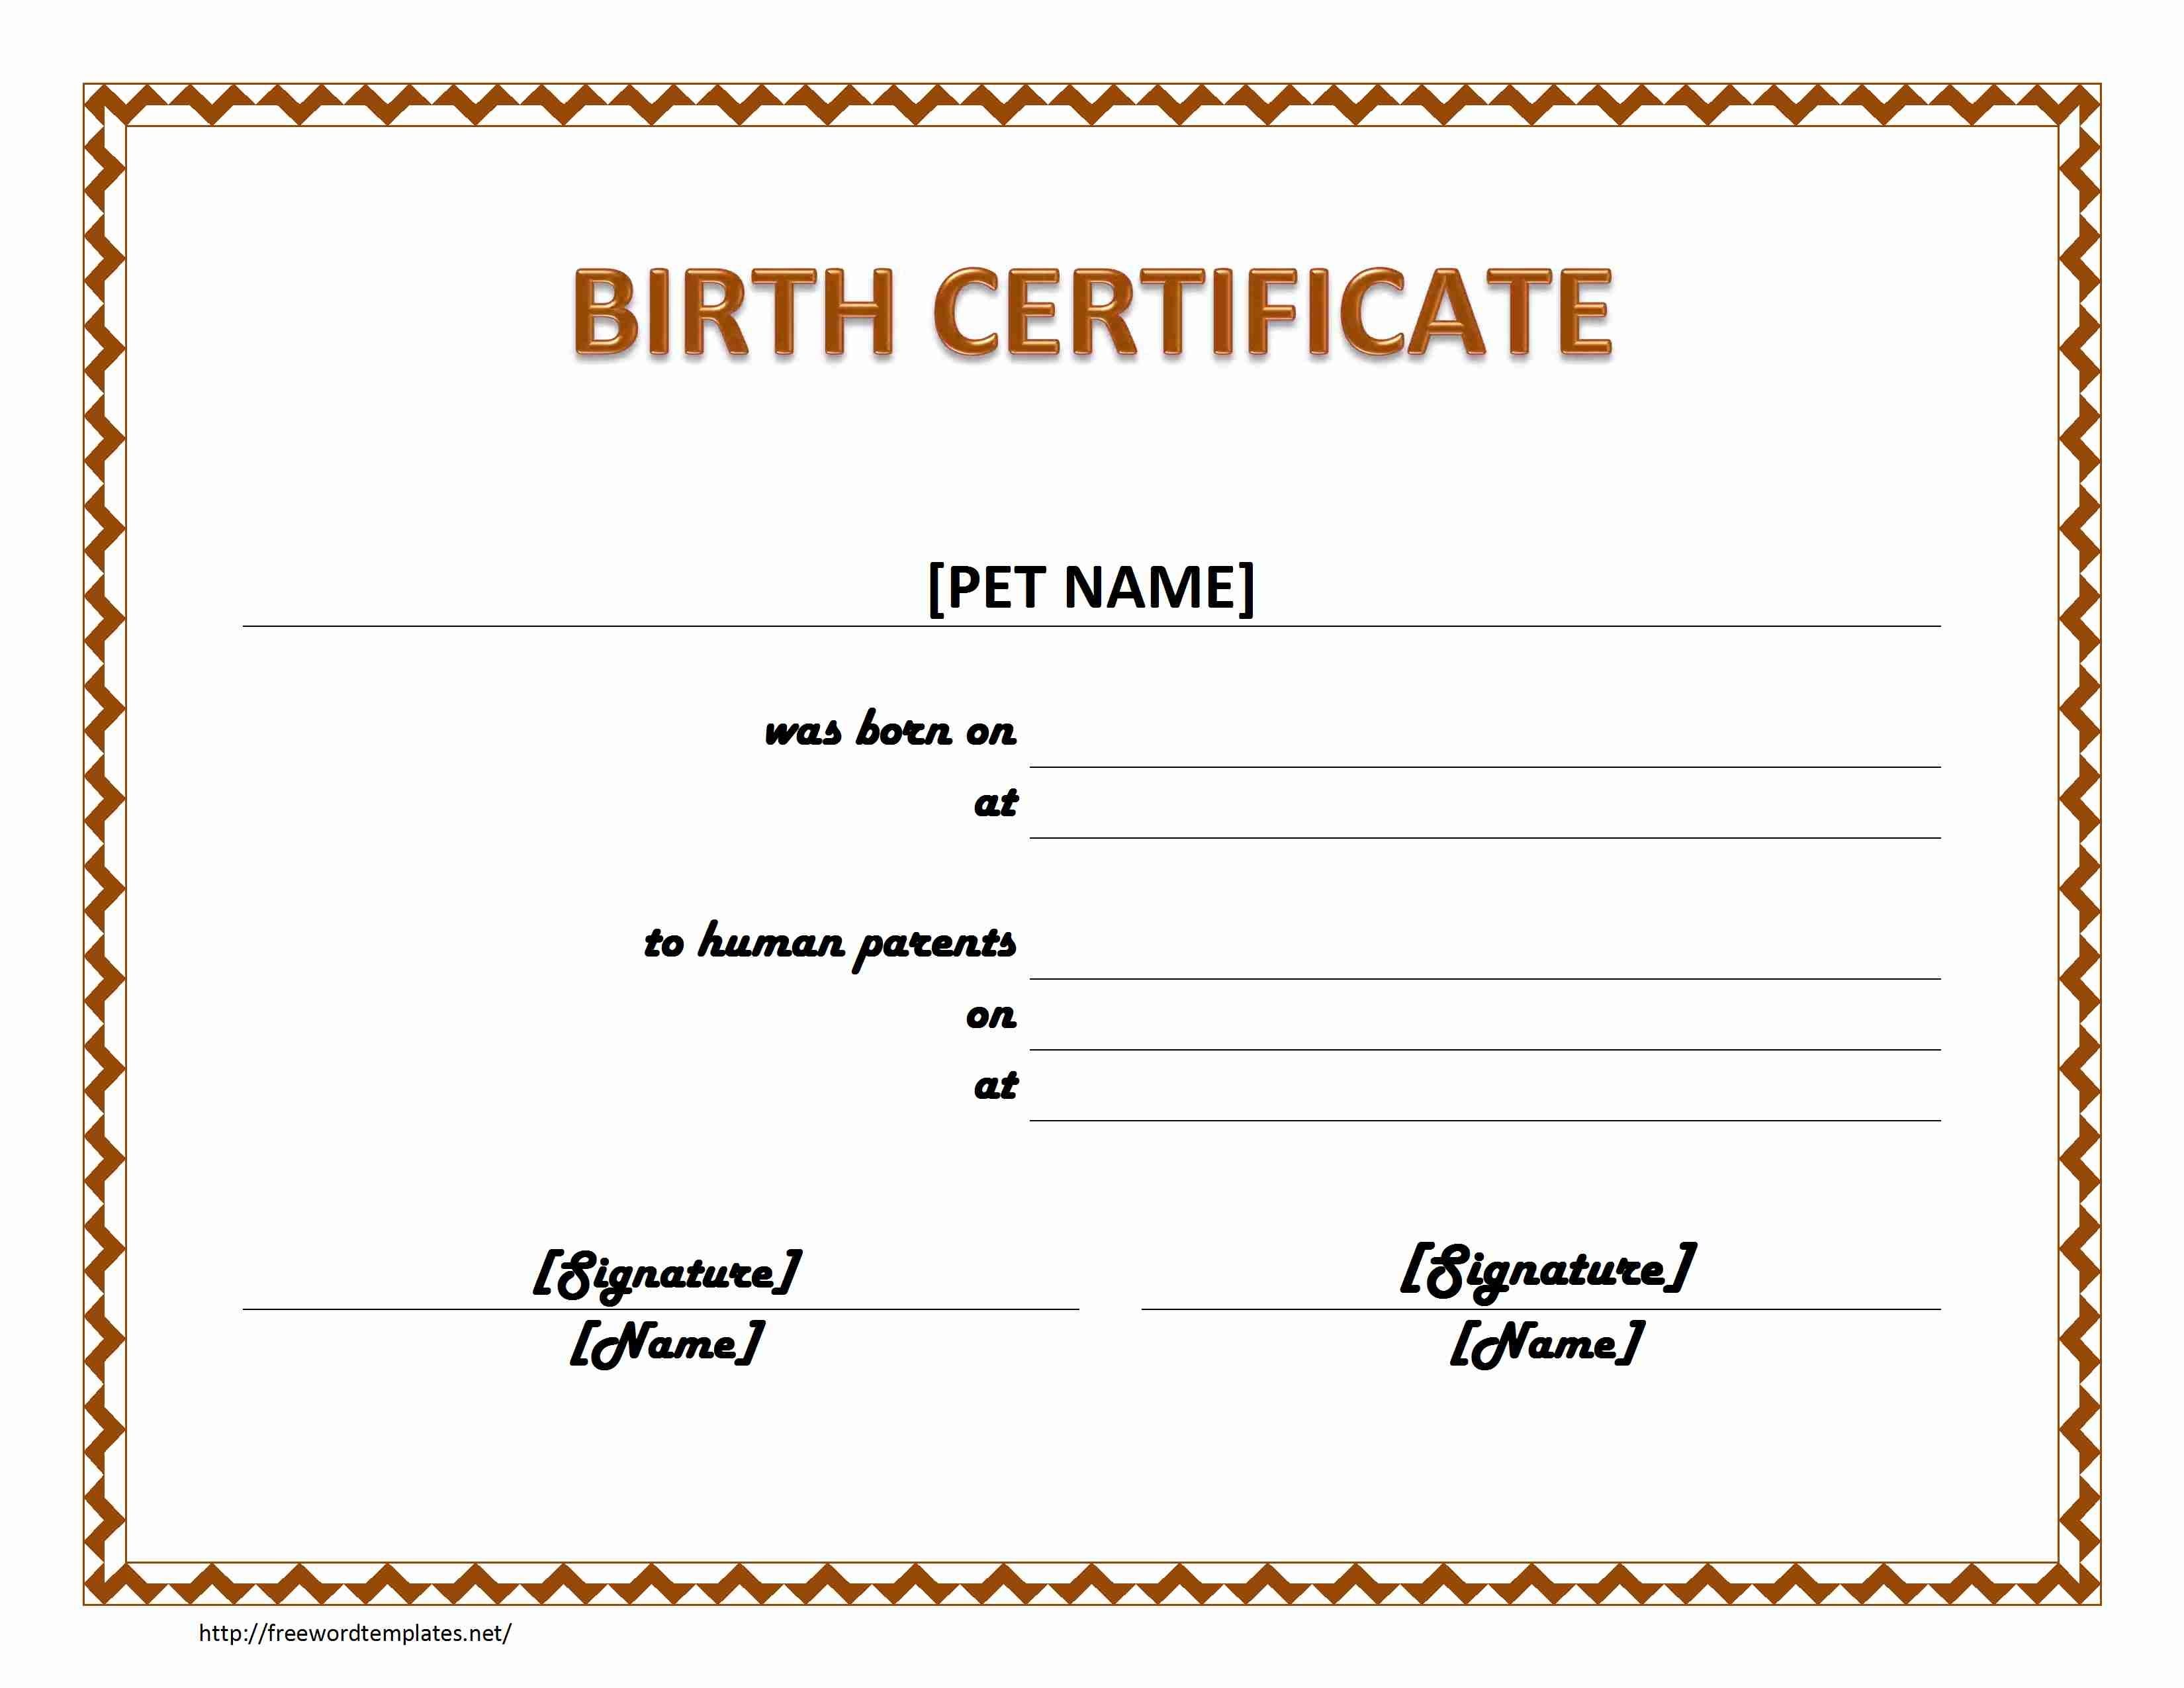 Pet Birth Certificate Maker | Pet Birth Certificate For Word | Puppy - Free Printable Birth Certificates For Puppies